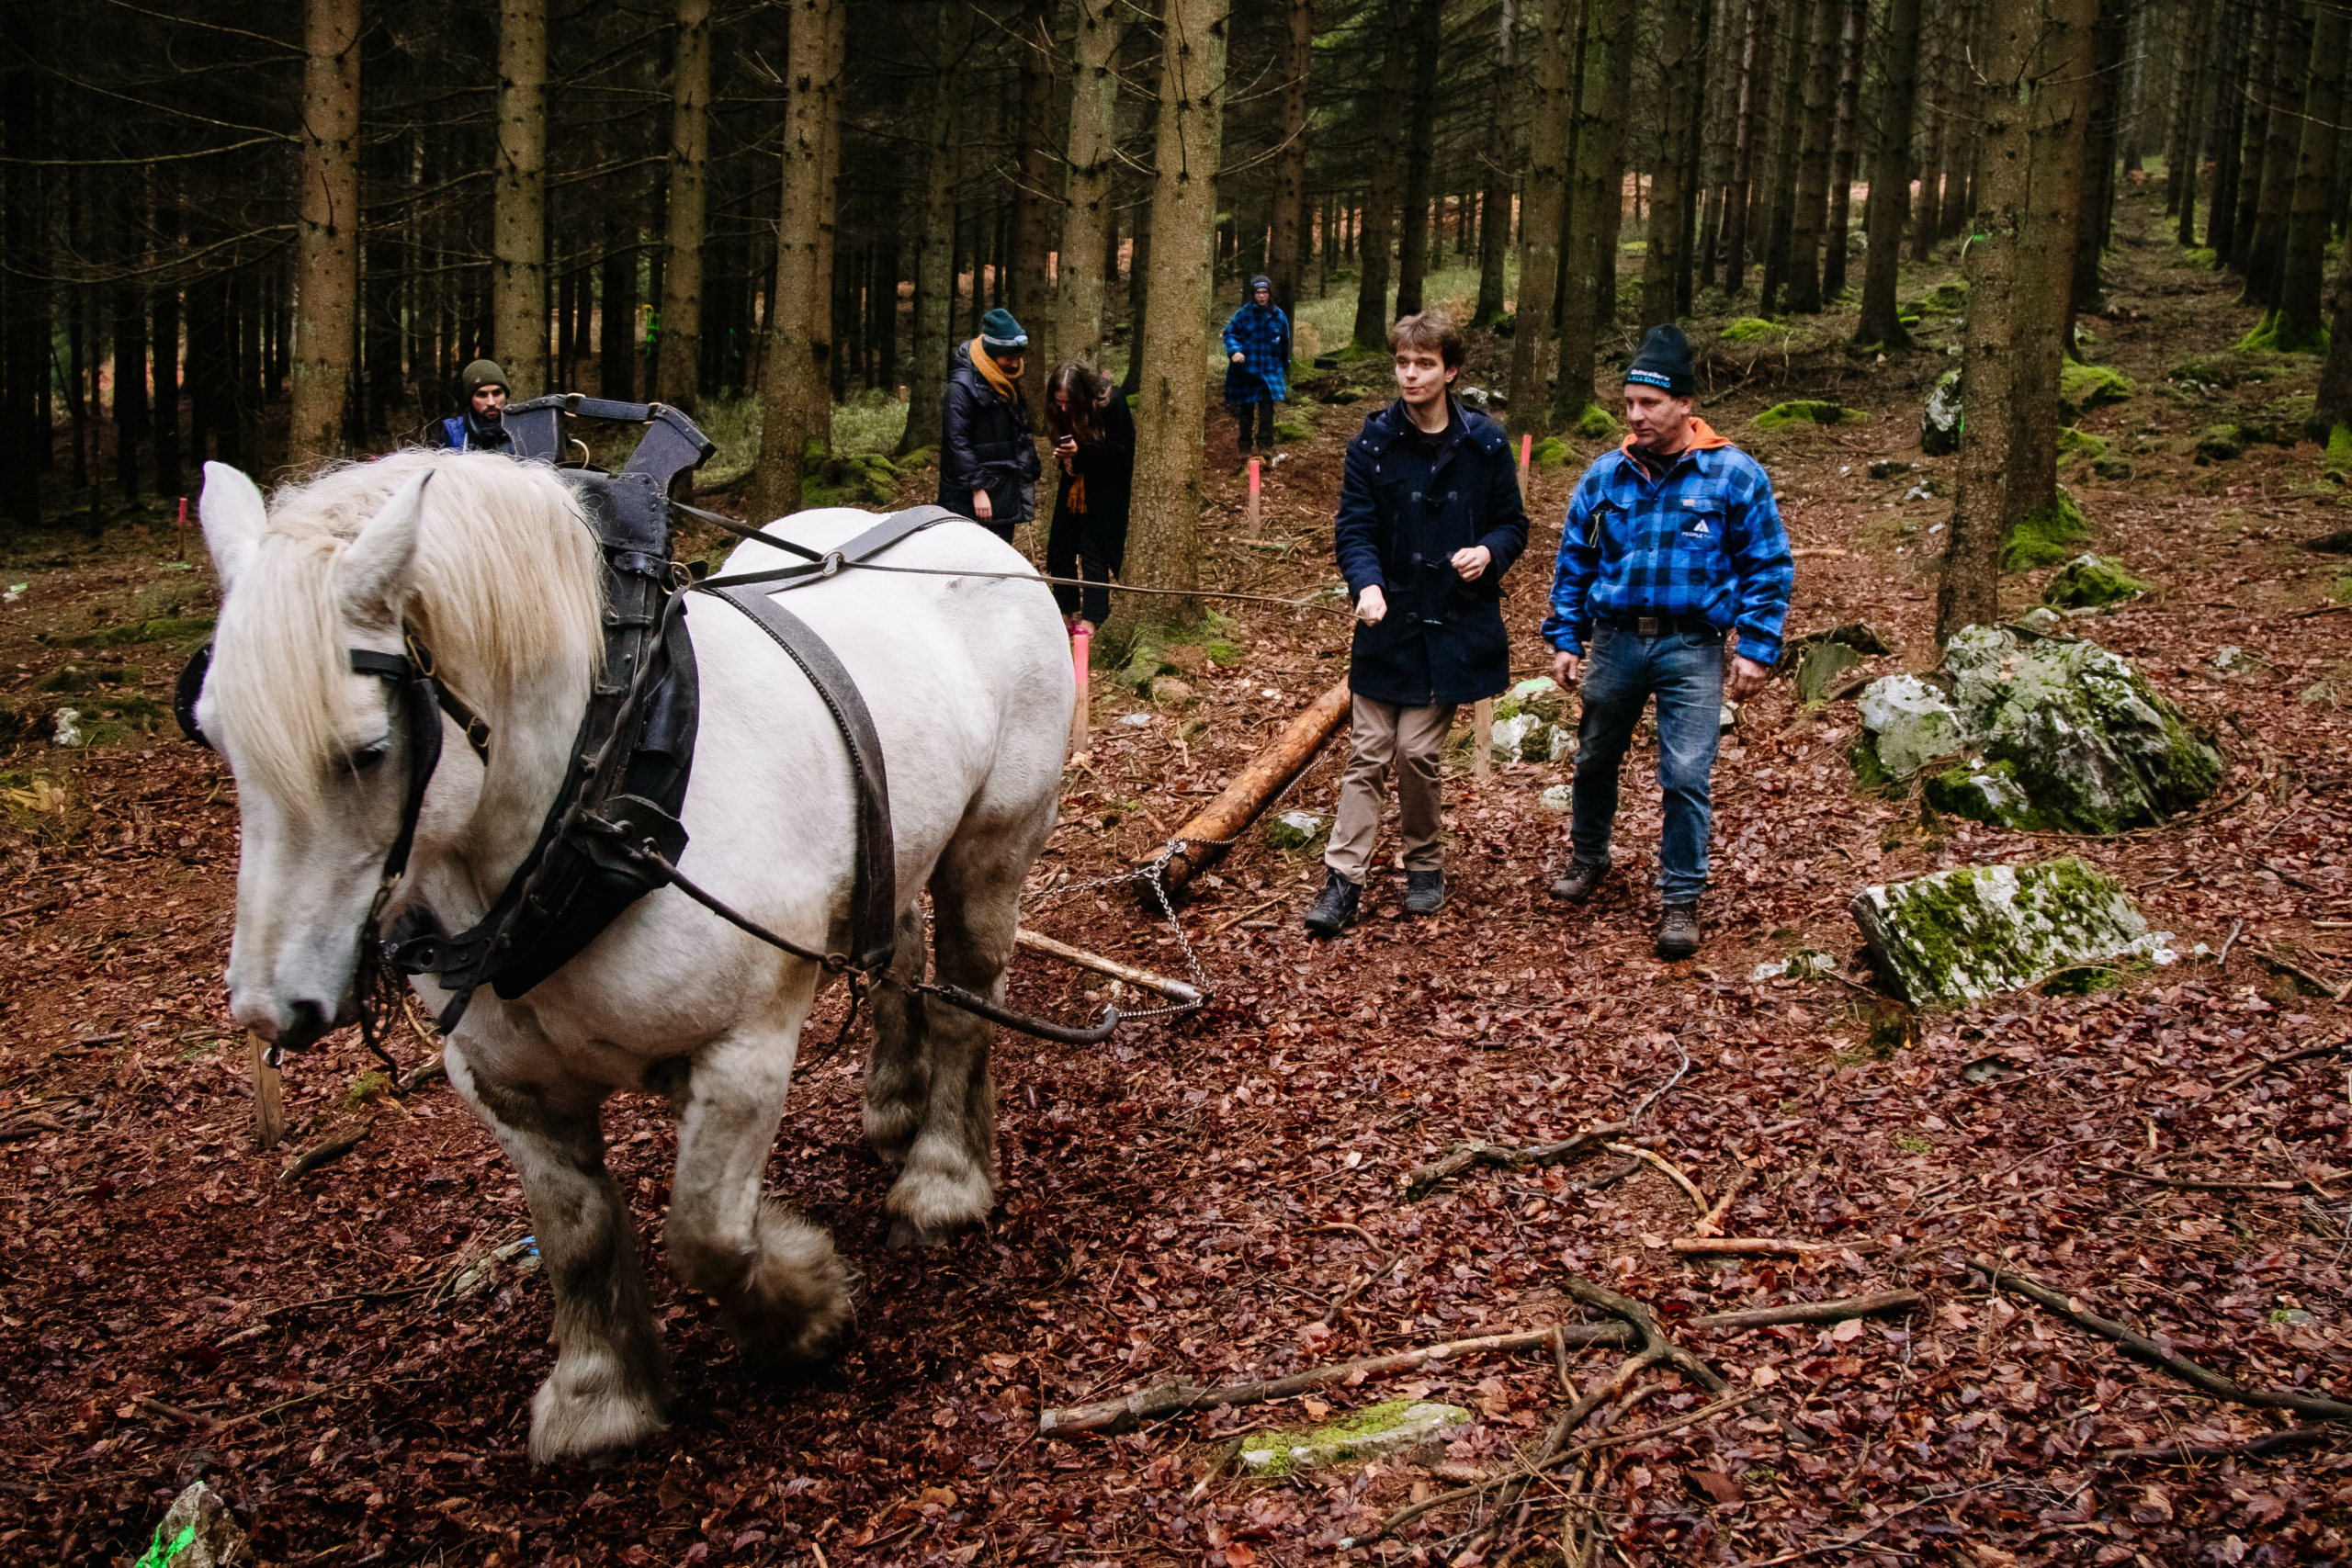 participant guiding a horse with the help of the Forest Games stevedore